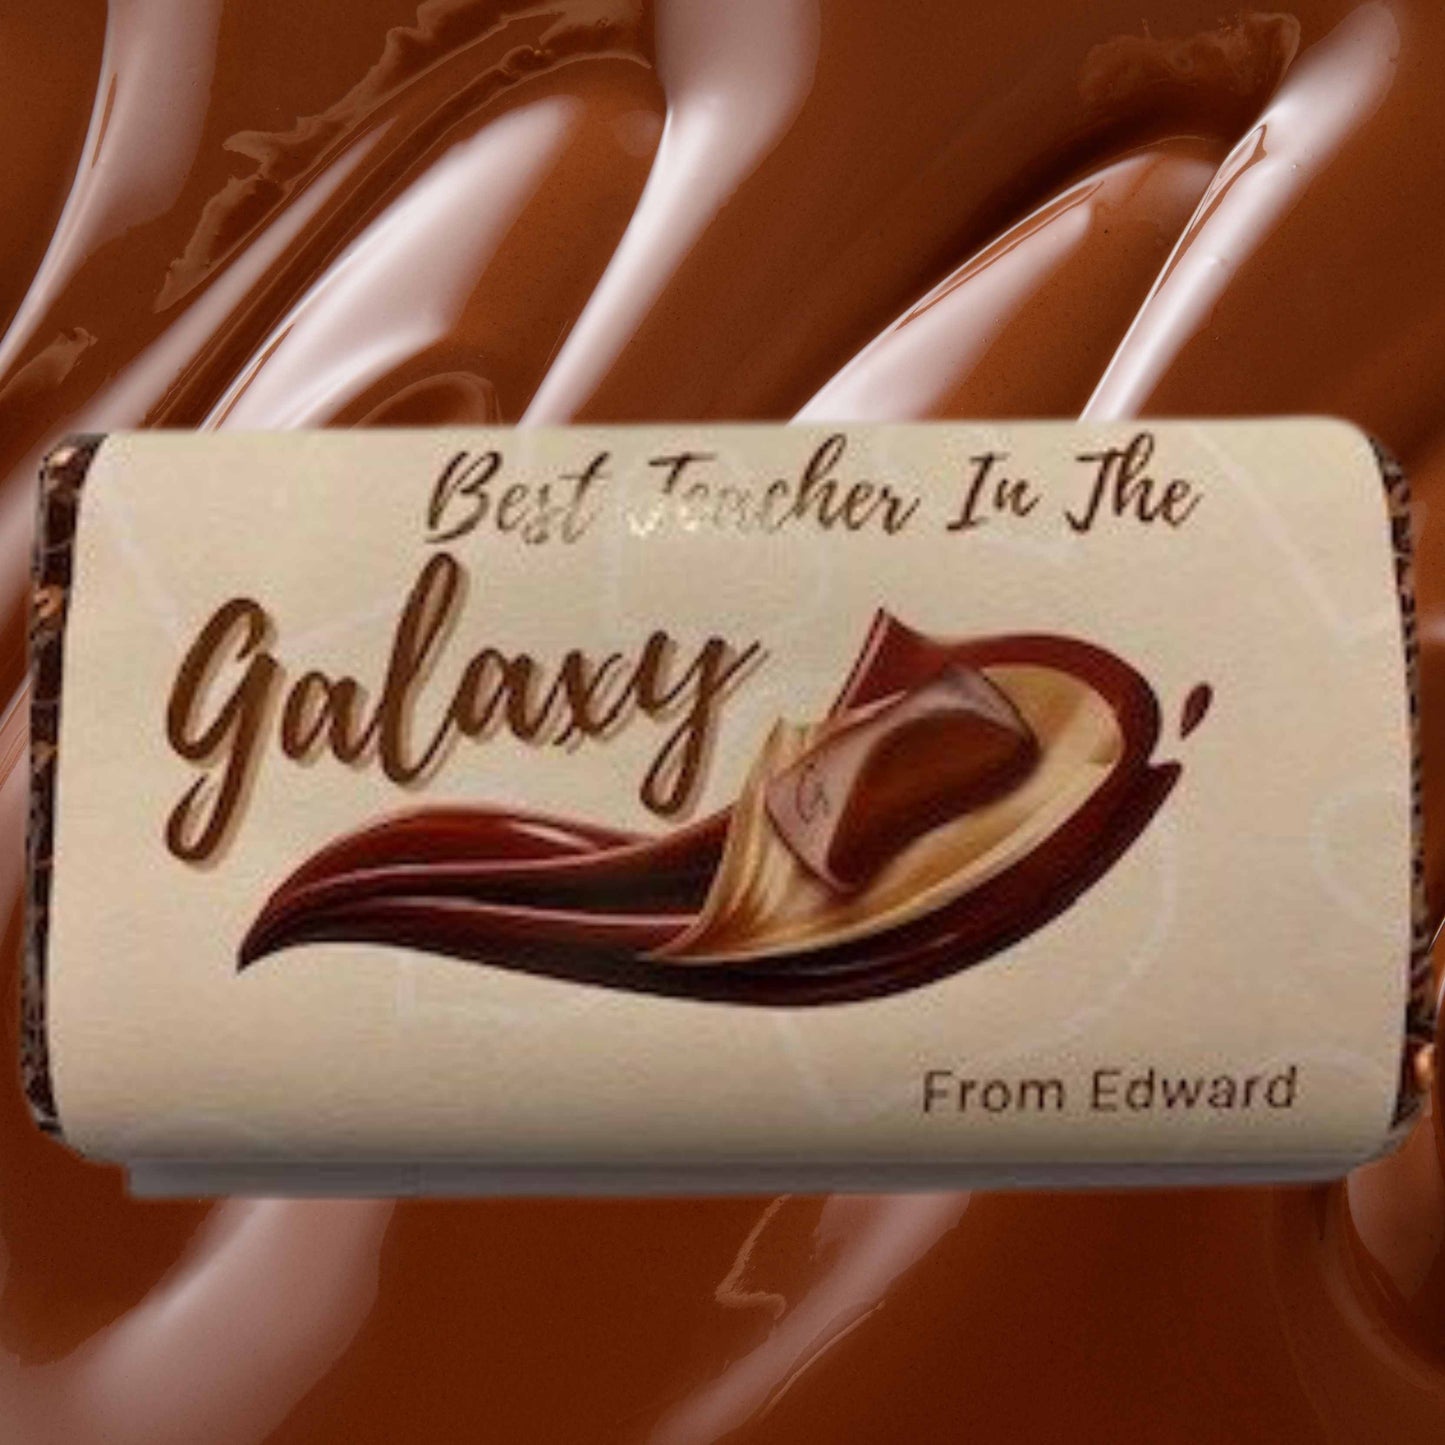 Best Teacher in the Galaxy personalised covered bar of Galaxy chocolate